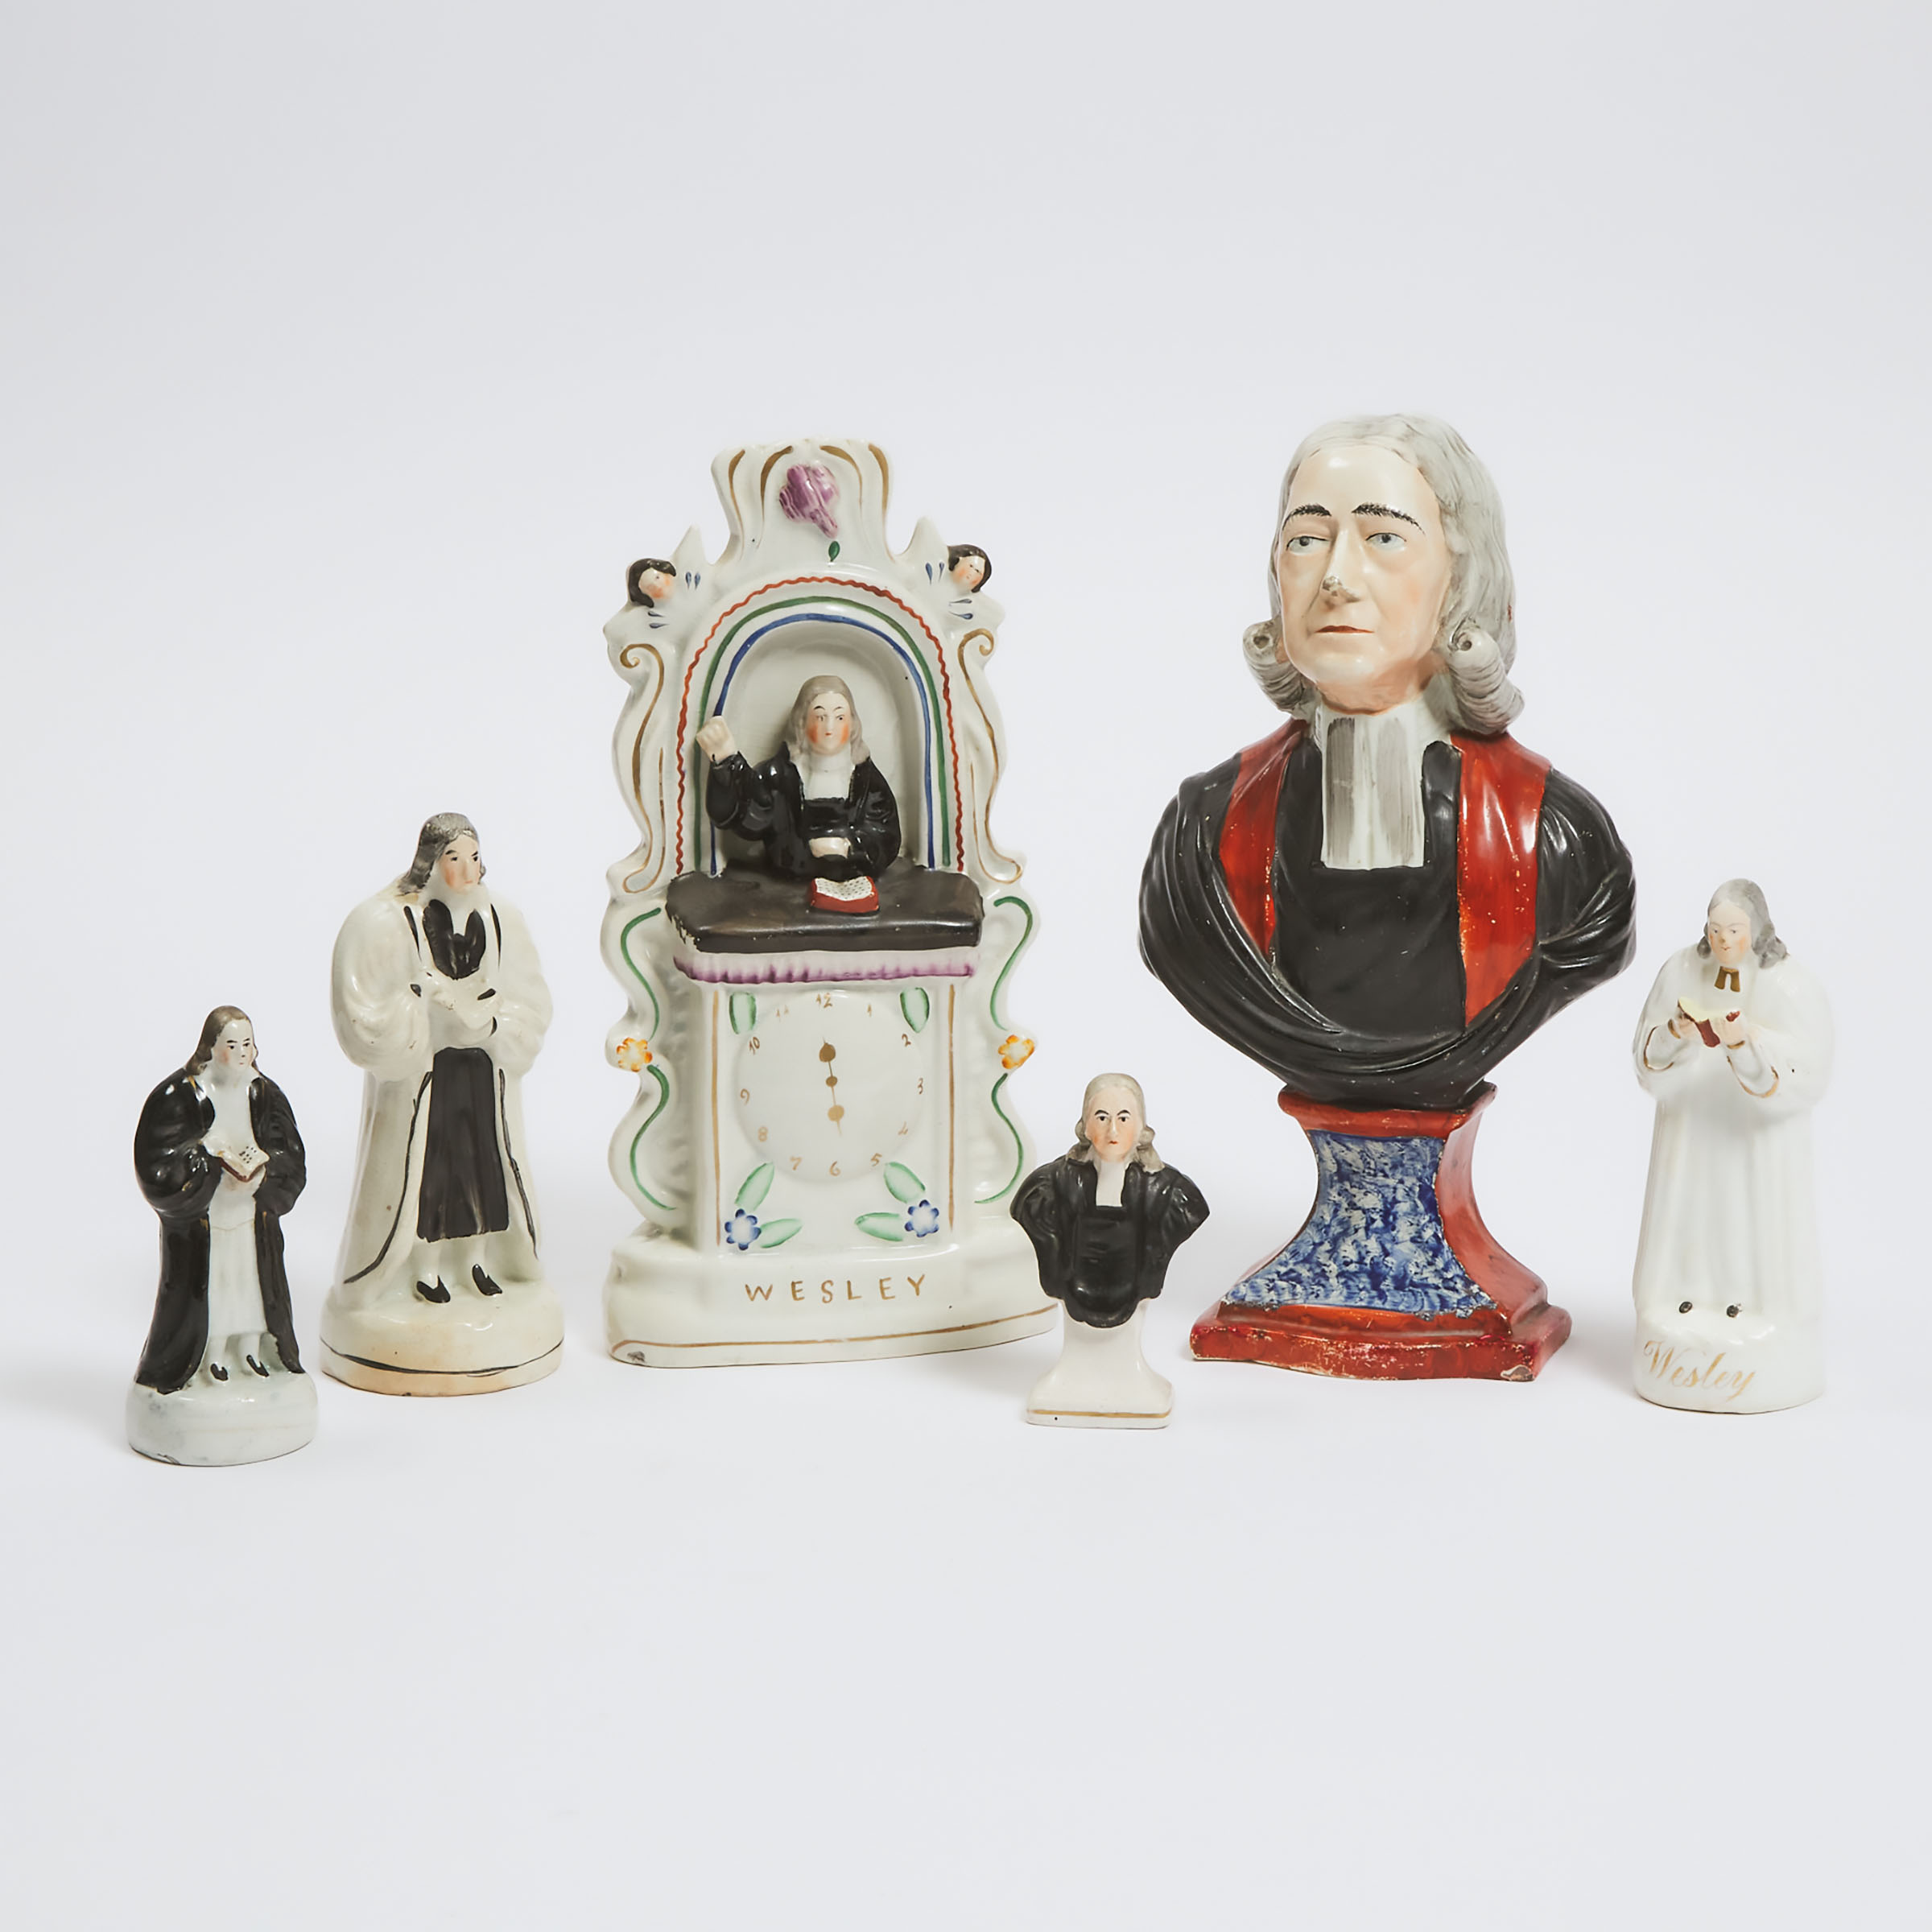 Group of Six Staffordshire Figures of John Wesley, 19th century